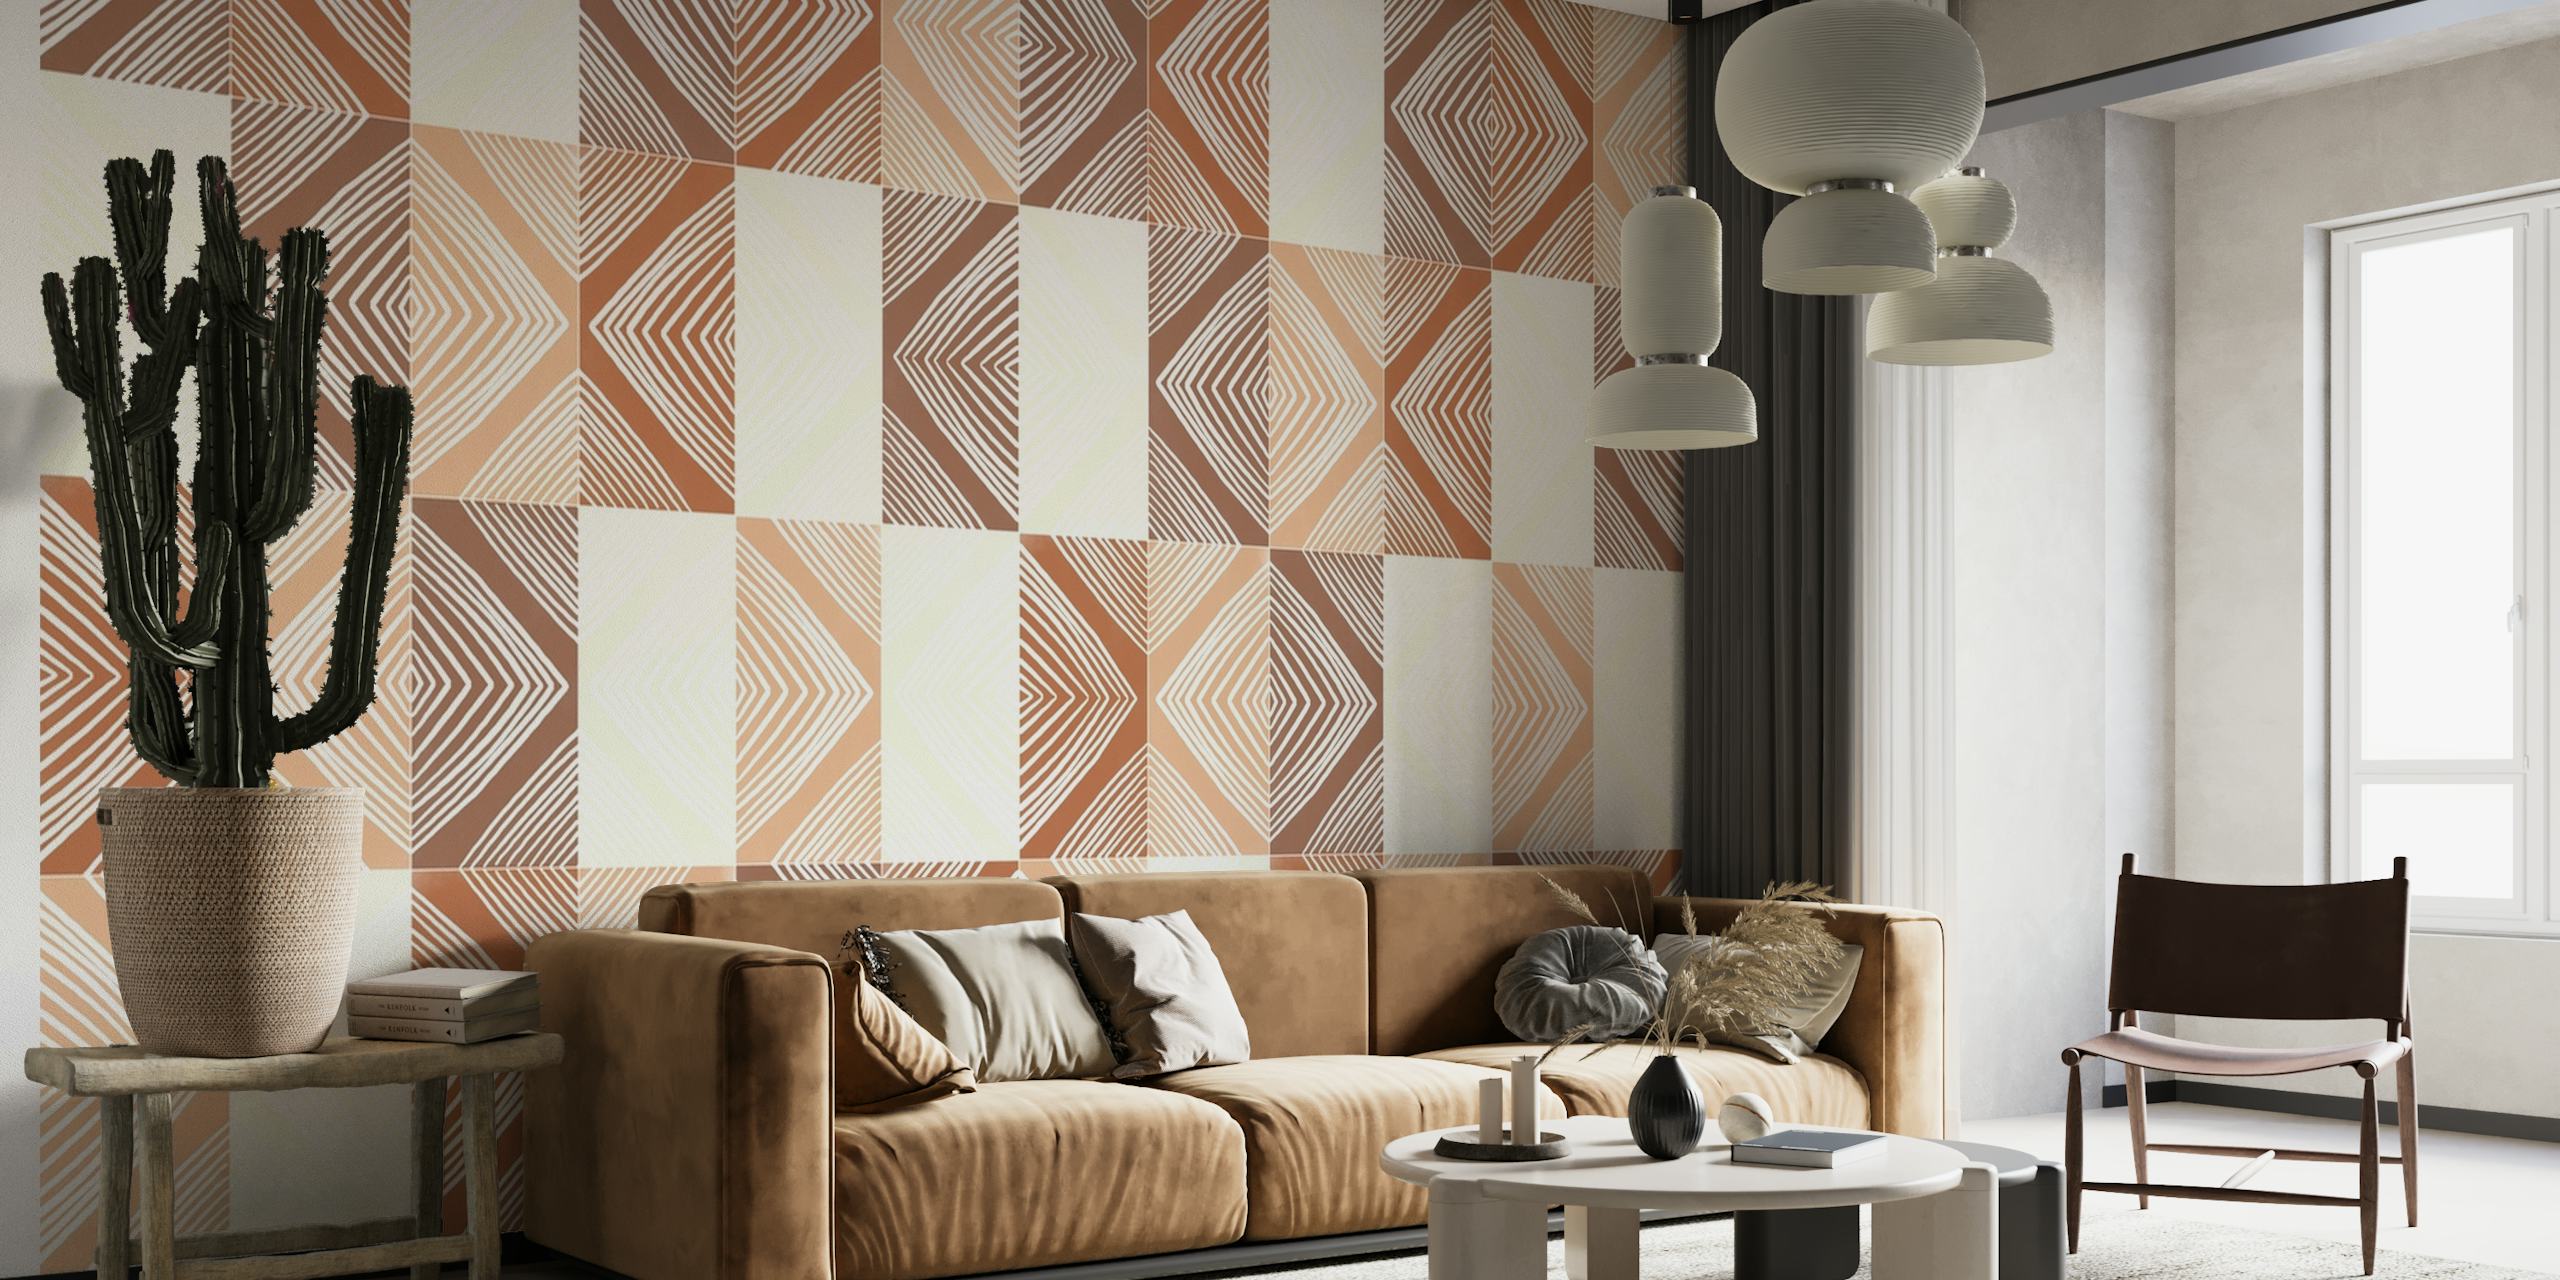 Mudcloth Tiles Two wallpaper